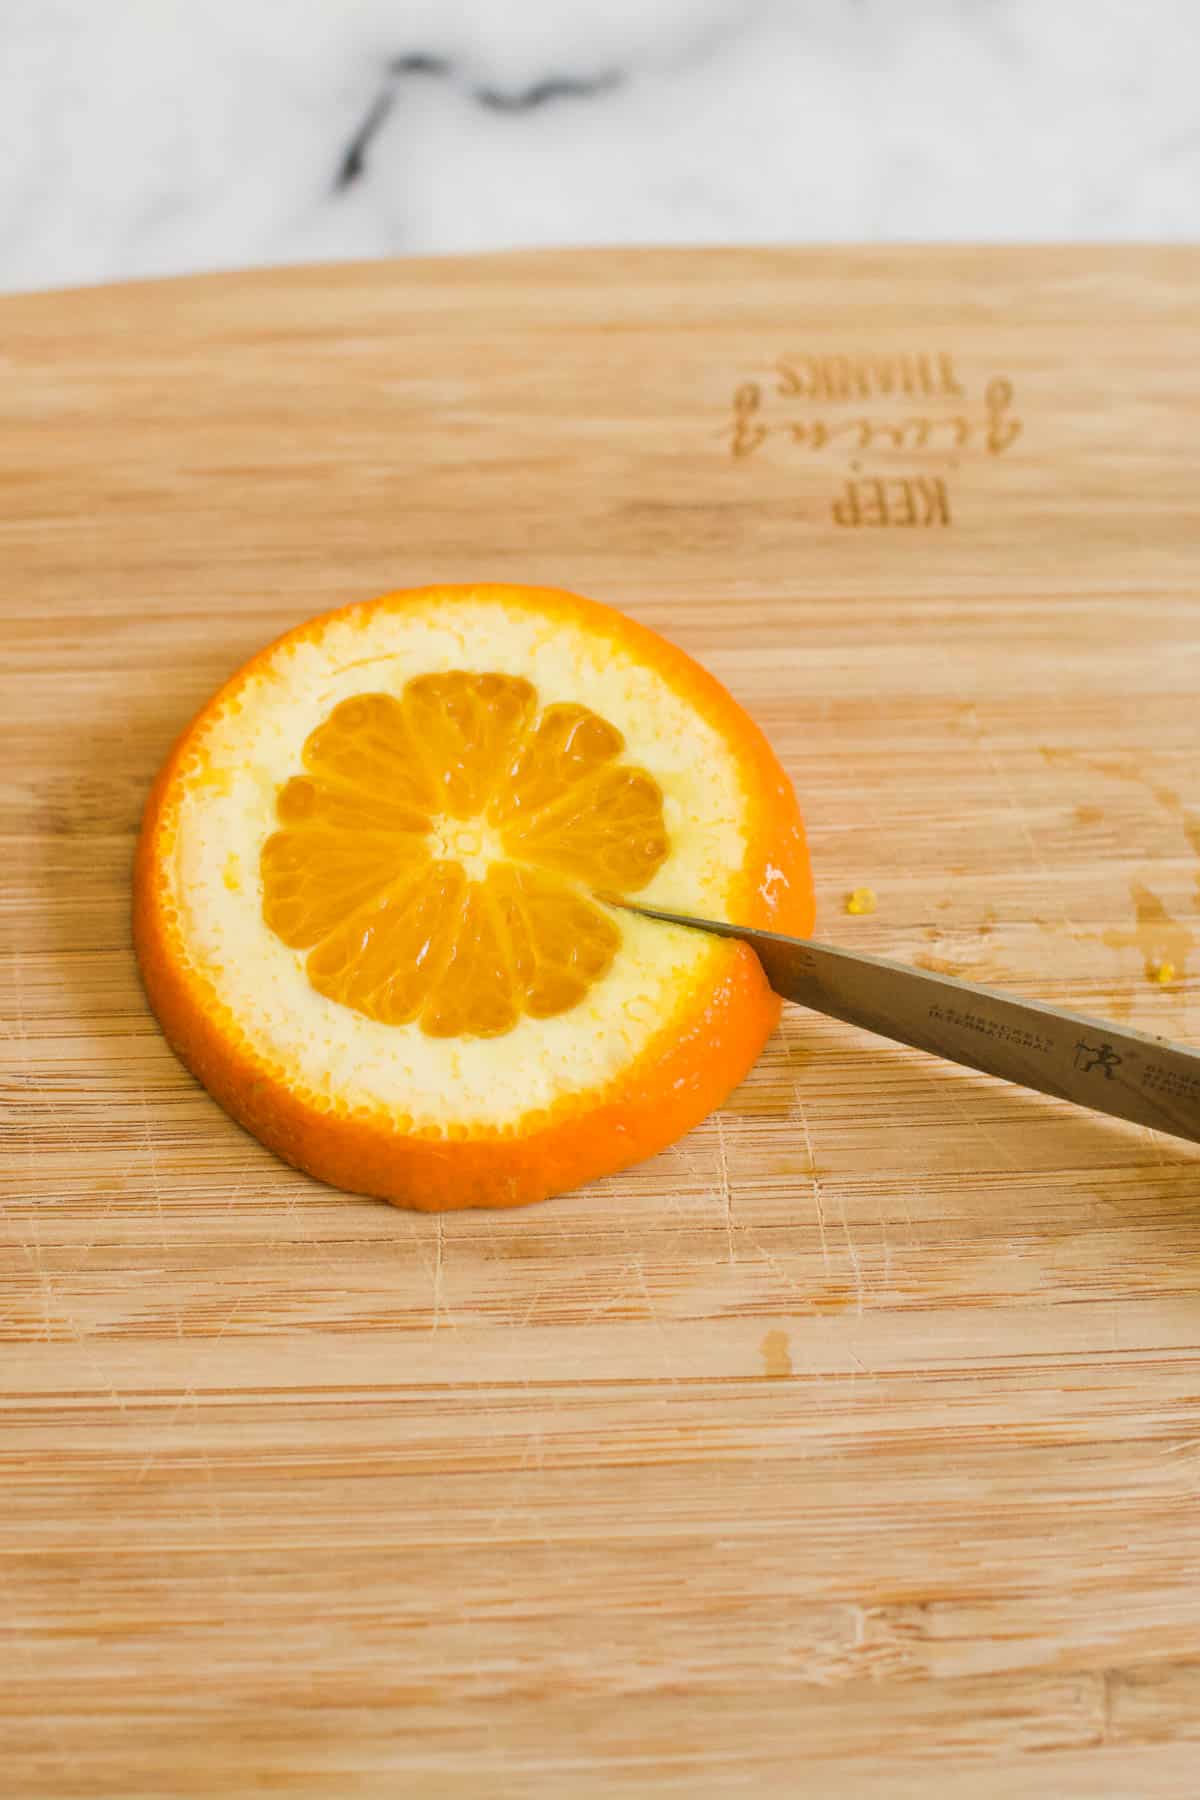 An orange slice on a wooden cutting board with a pairing knife slicing through the peel.